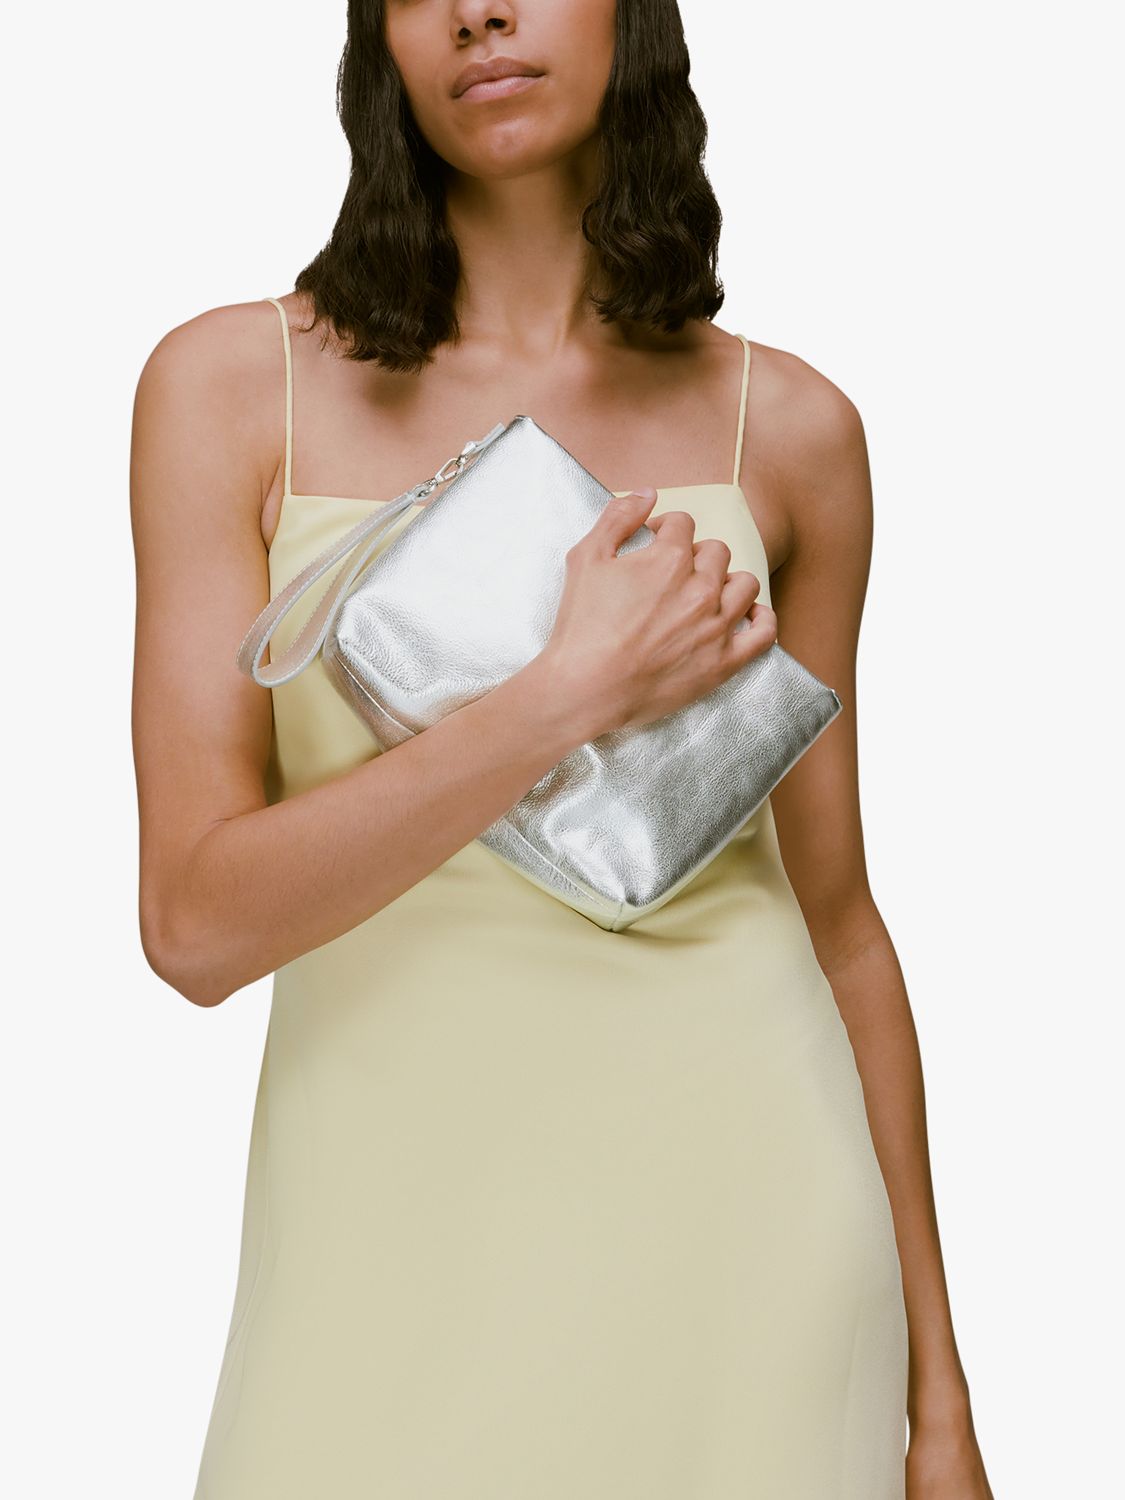 Buy Whistles Avah Leather Zip Clutch Bag Online at johnlewis.com